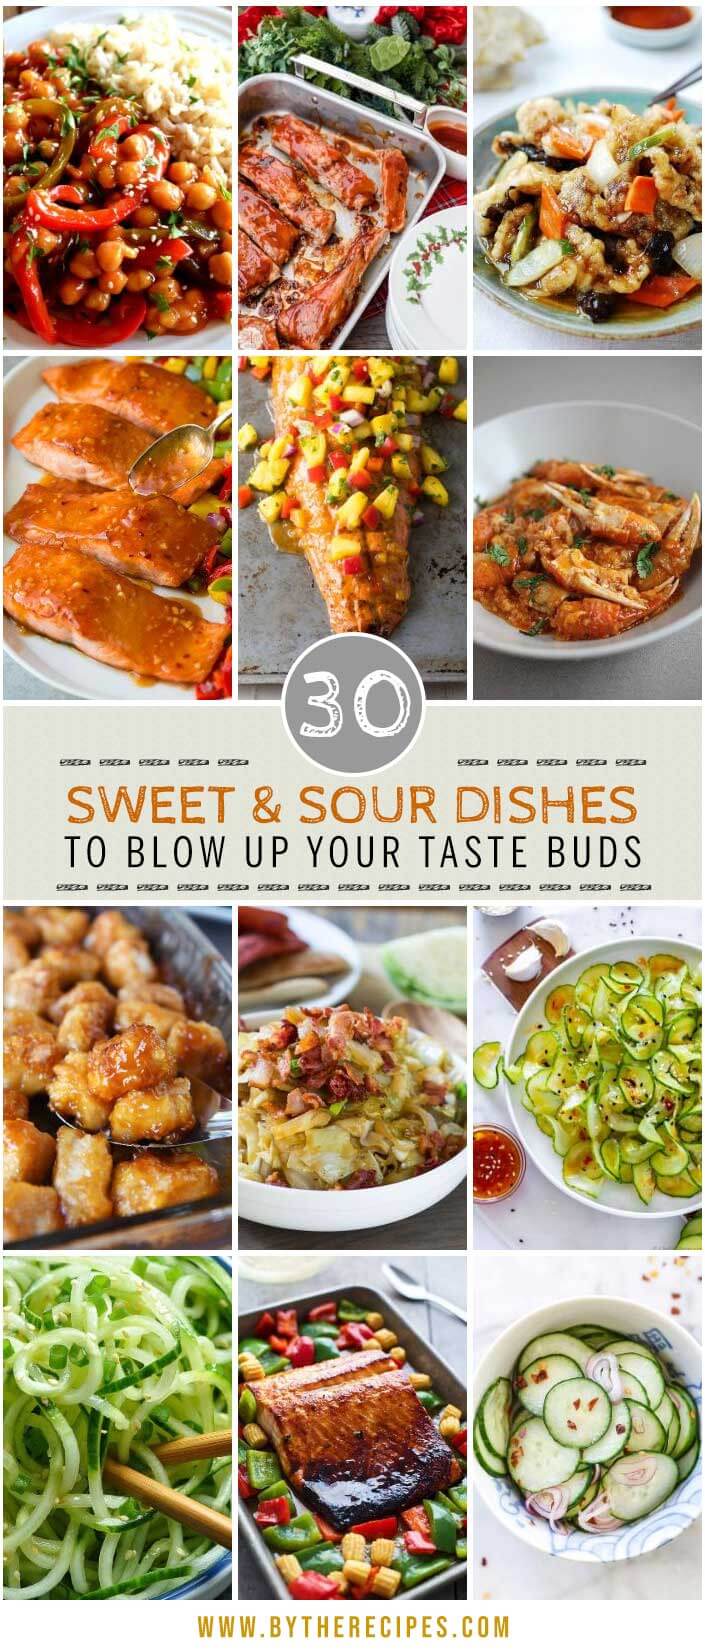 30 Sweet And Sour Dishes To Blow Up Your Taste Buds